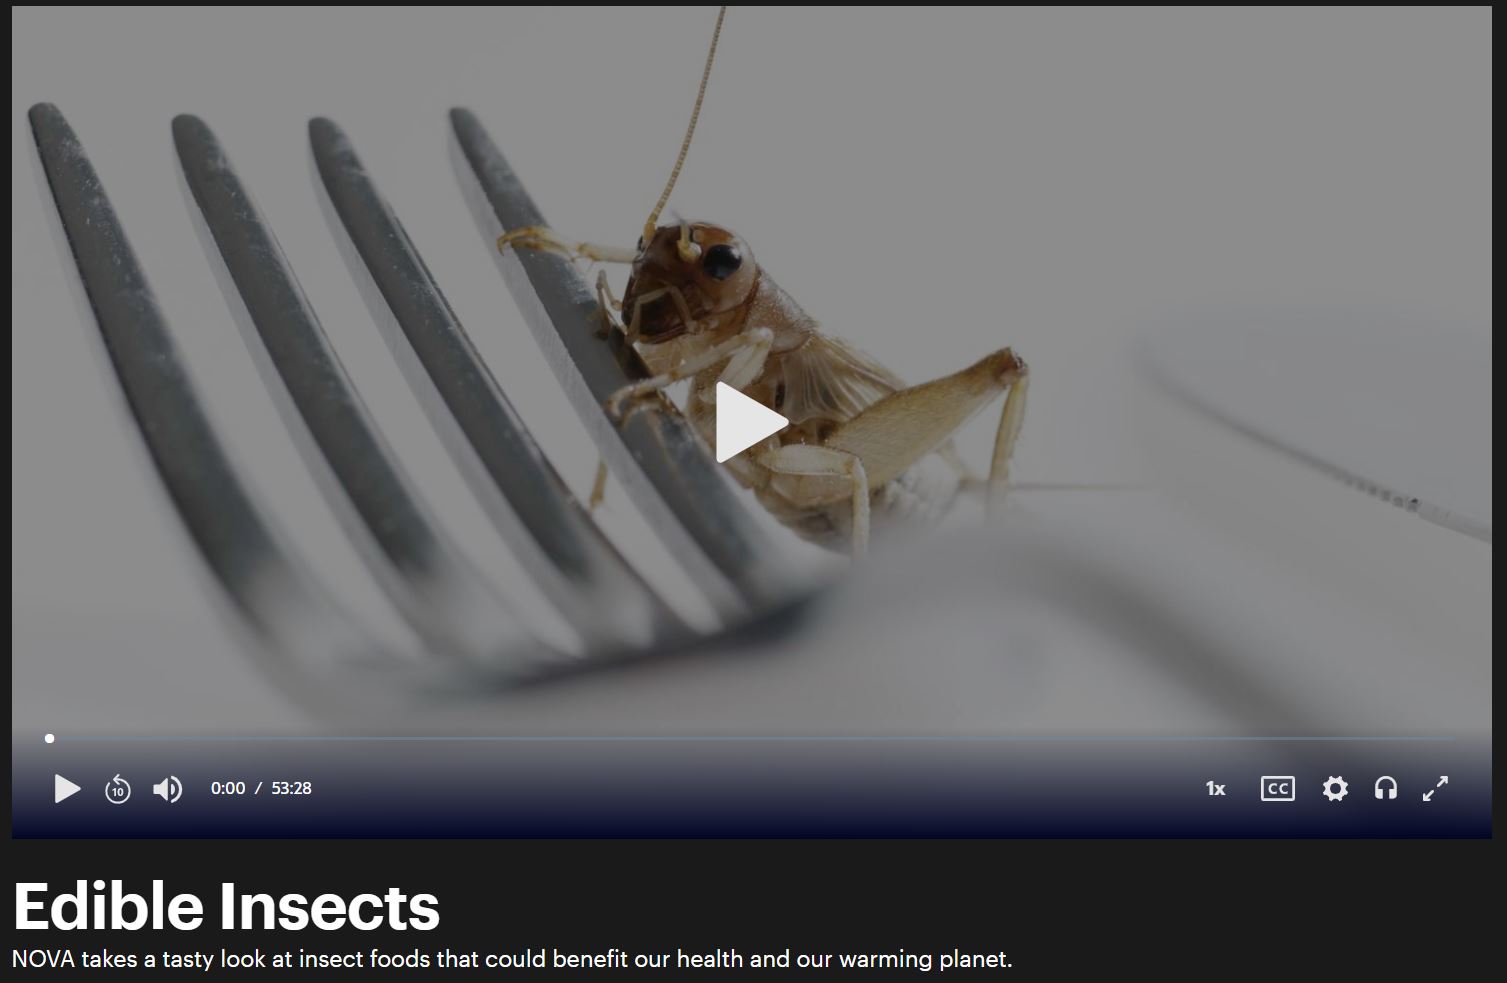 A screenshot from the PBS NOVA: Edible Insects broadcast.